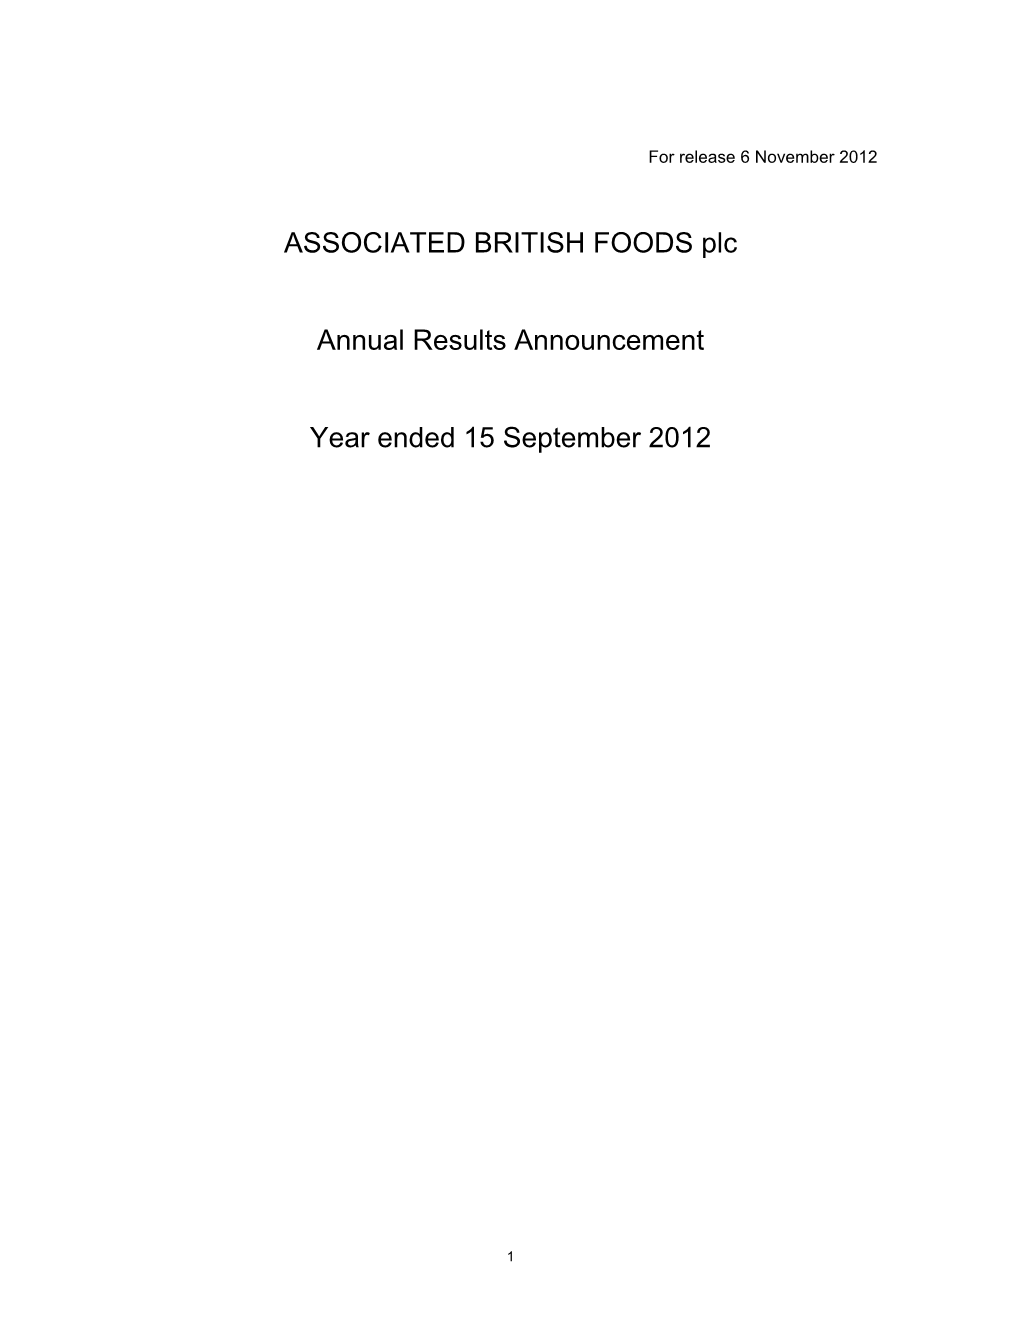 Announcement of 2012 Annual Results